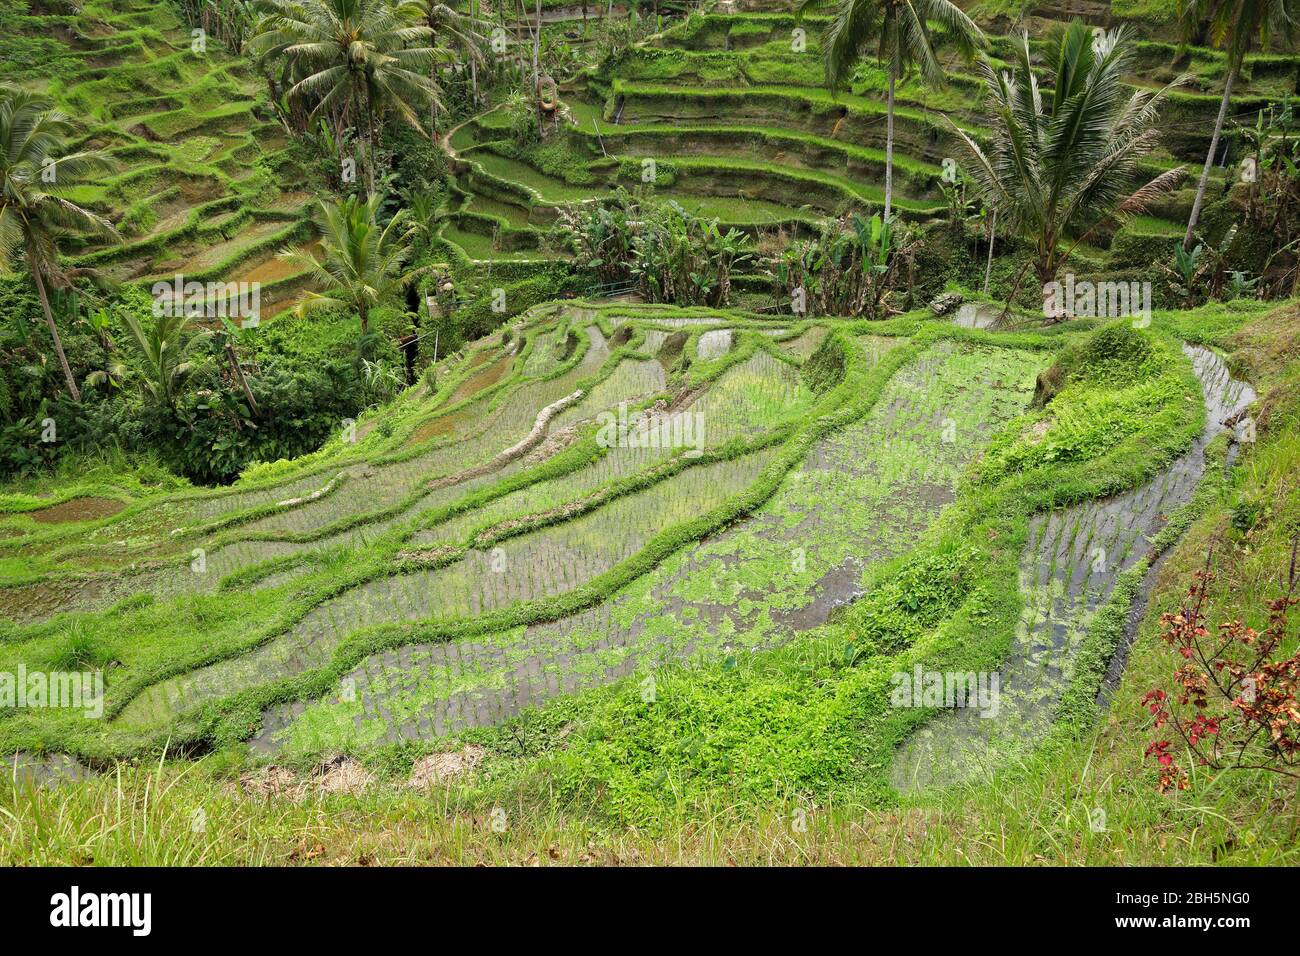 Scenic view of the lush green Tegallalang rice terraces in Ubud, Bali, Indonesia Stock Photo